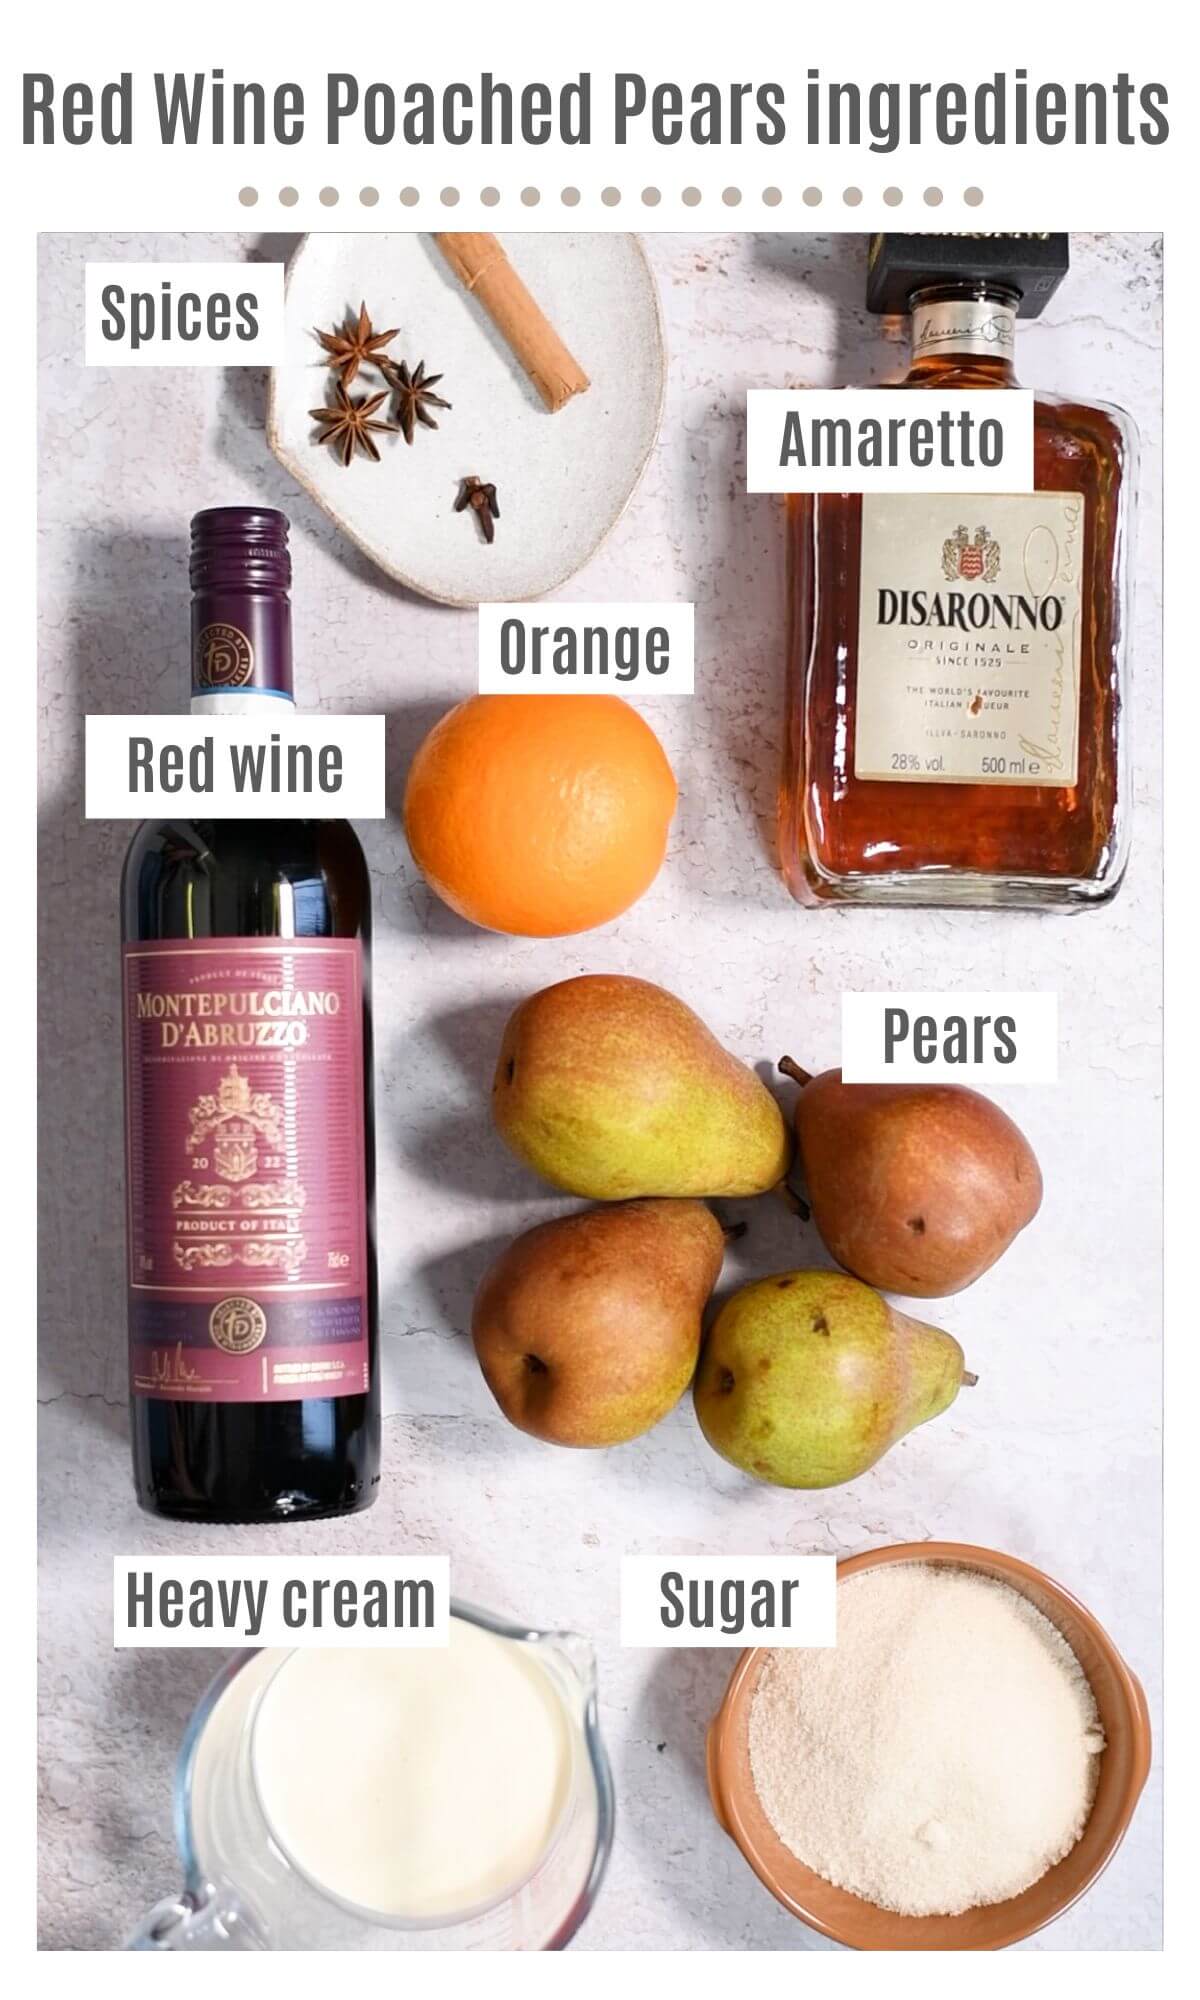 An overhead shot of all the ingredients needed to make red wine poached pears with Amaretto whipped cream.